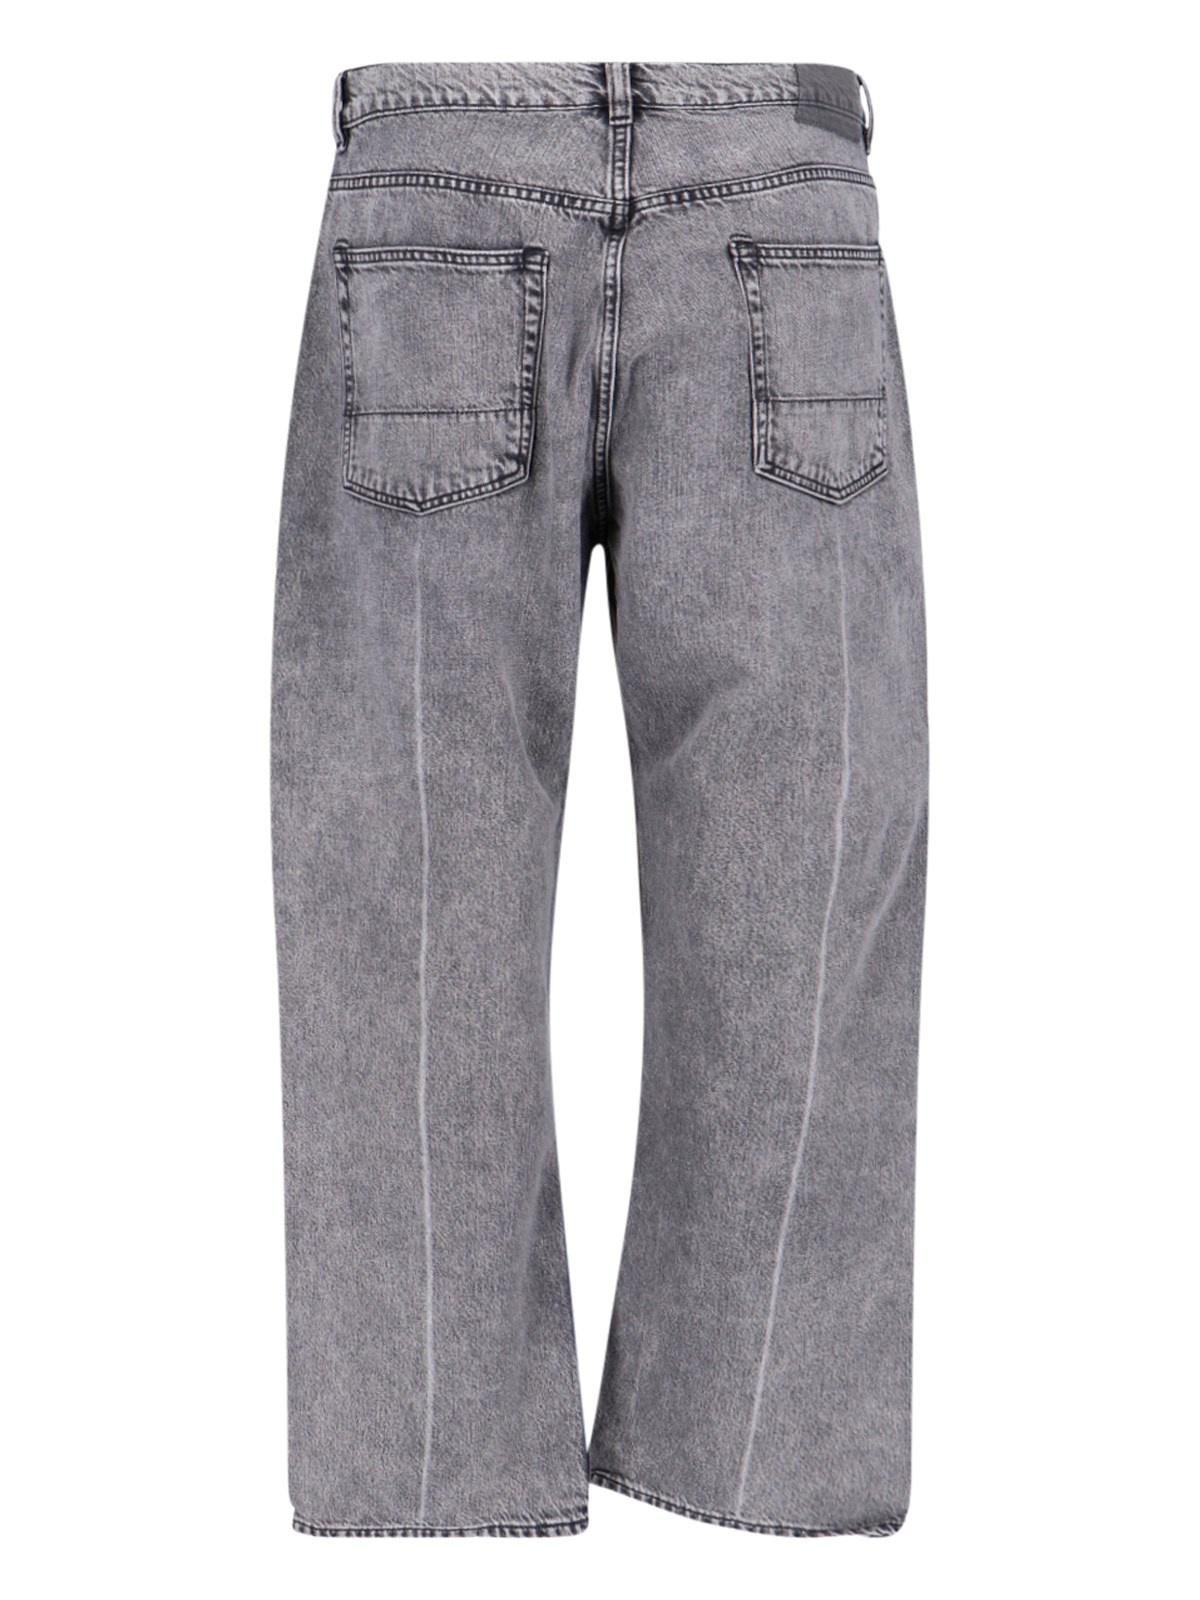 "EXTENDED THIRD CUT" JEANS - 3